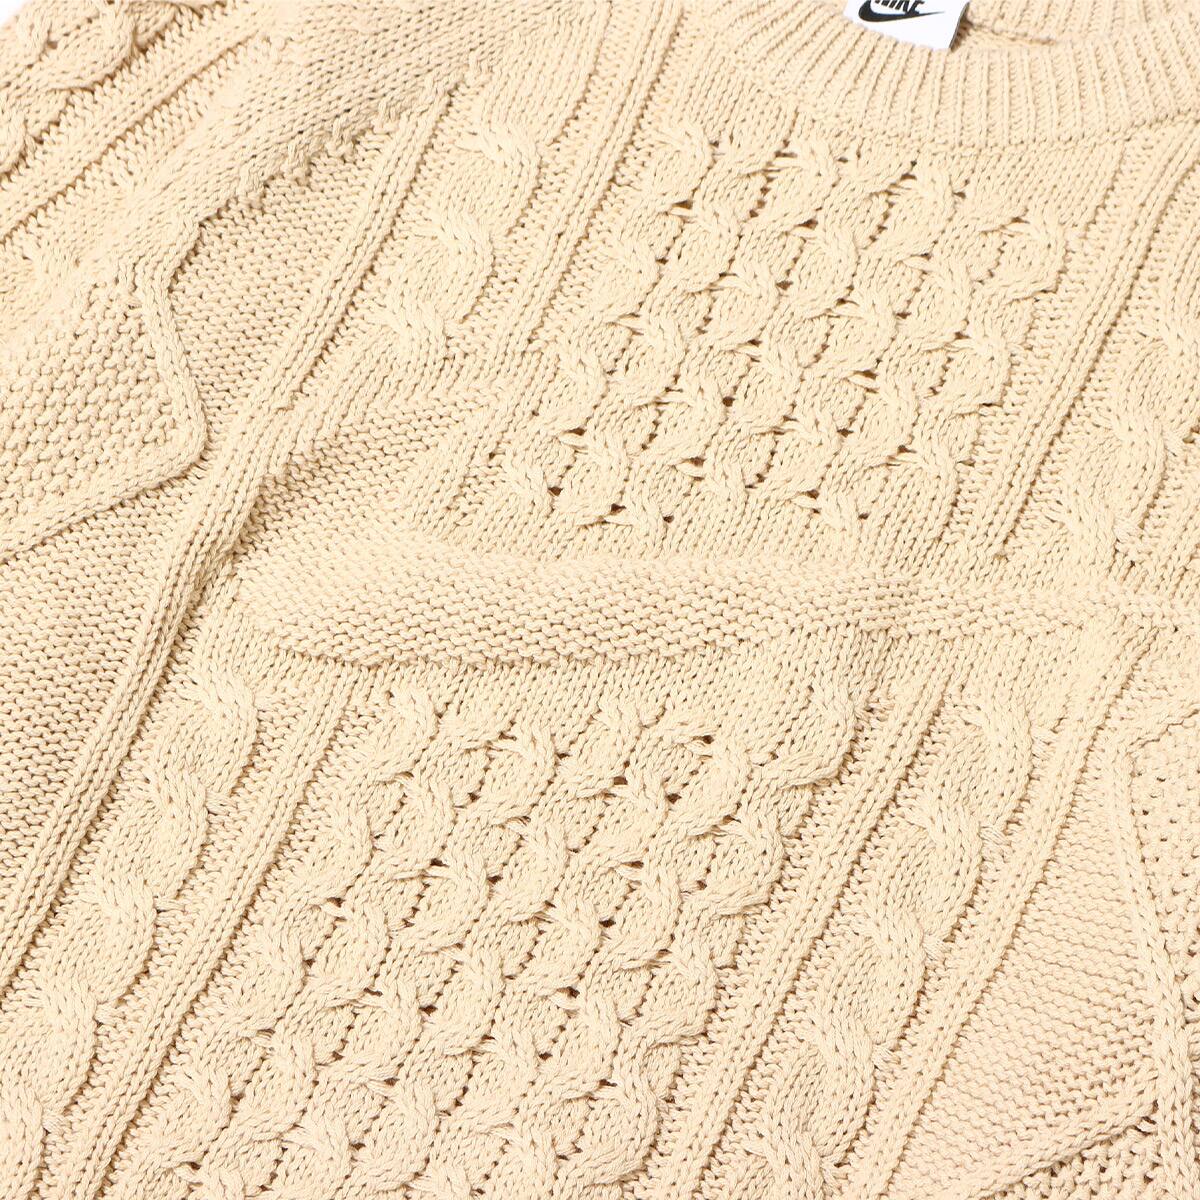 NIKE AS M NL CABLE KNIT SWEATER Lサイズ 新品